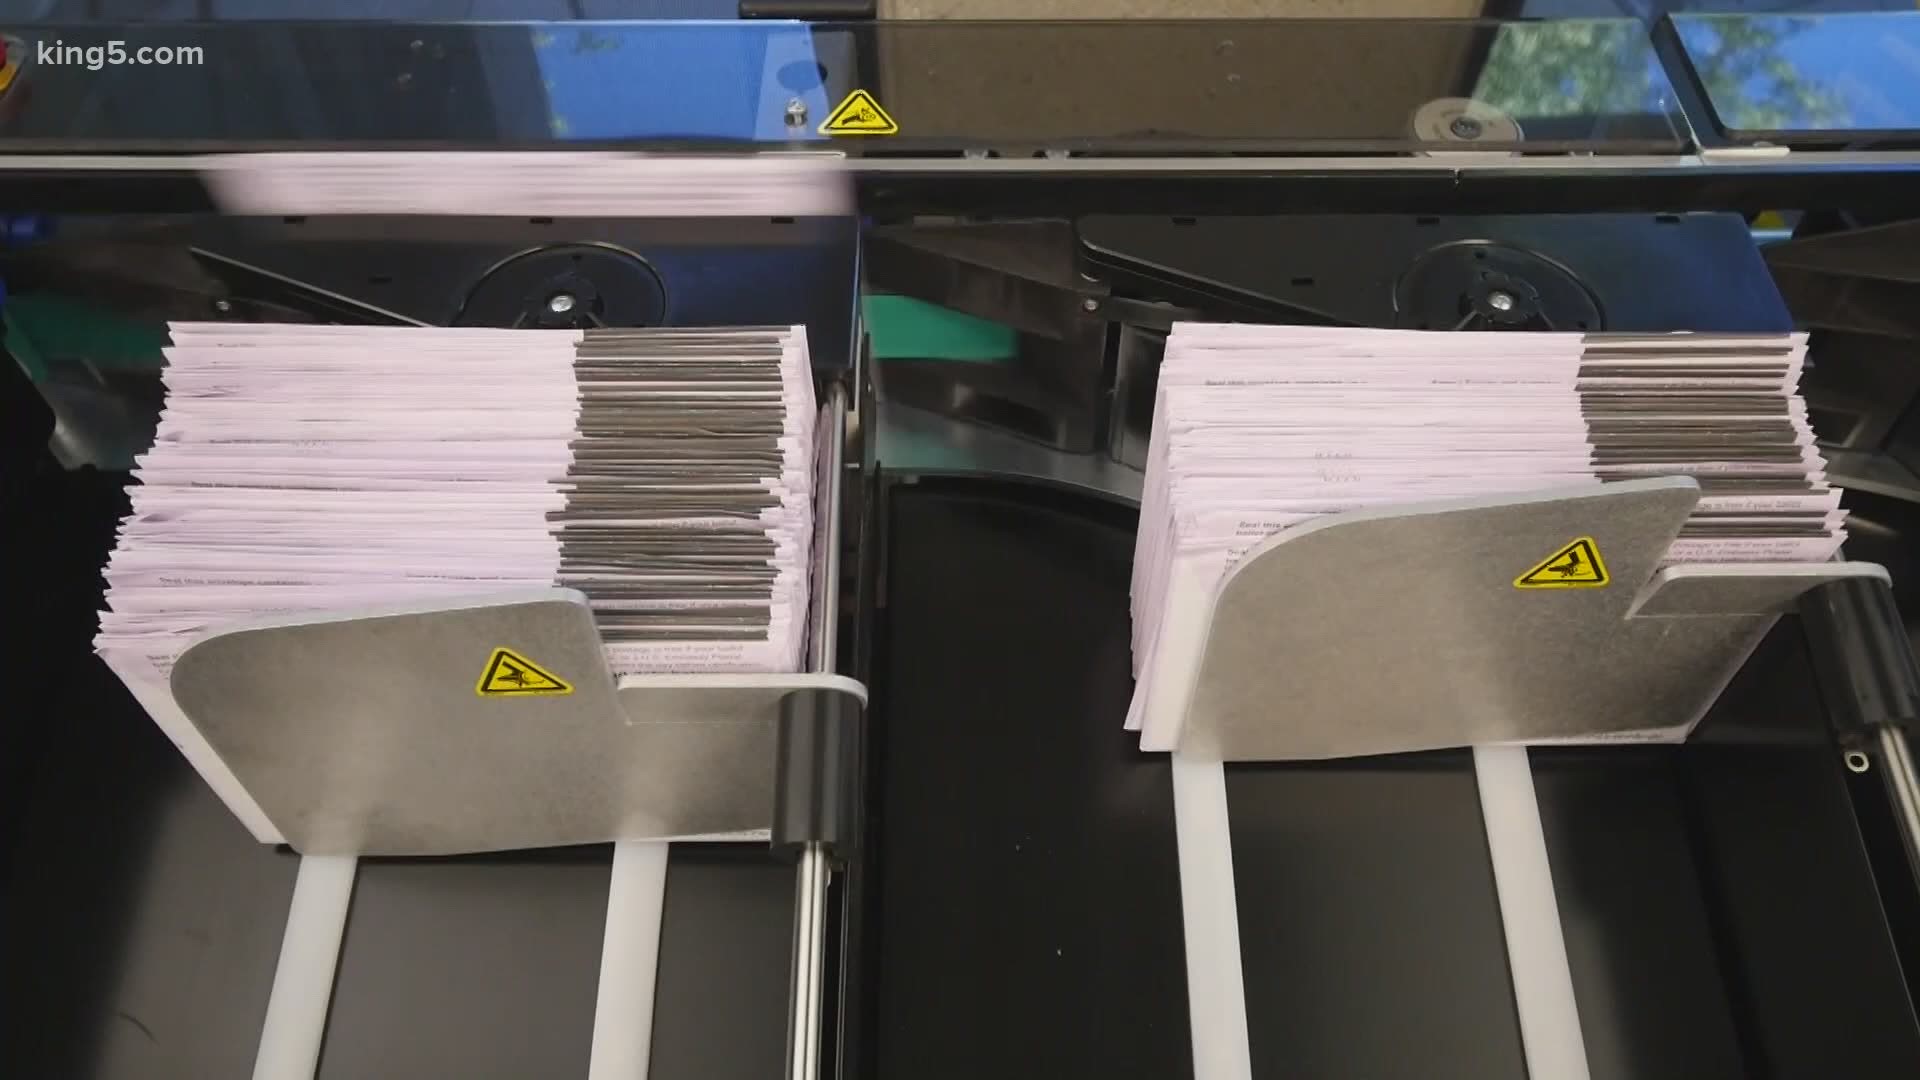 Kitsap County Elections shows the process for verifying, tabulating and counting ballots after they are returned in the mail or through a ballot drop box.